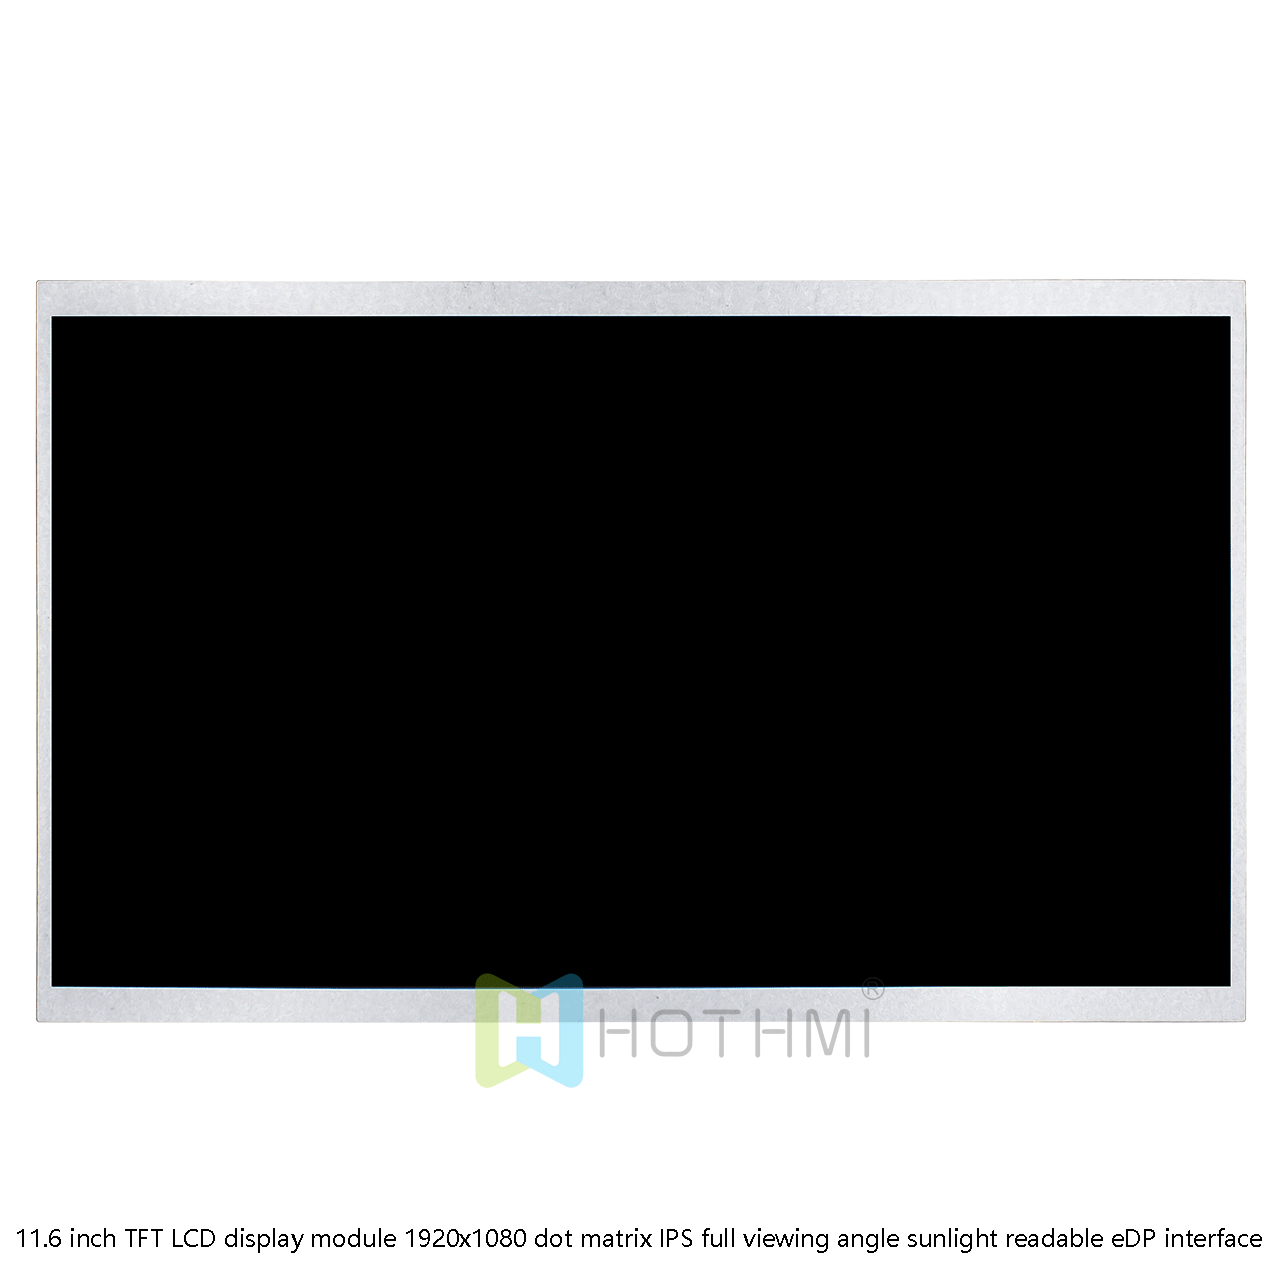 11.6 inch TFT LCD display module 1920x1080 dot matrix IPS full viewing angle sunlight readable eDP interface compatible with industrial computers